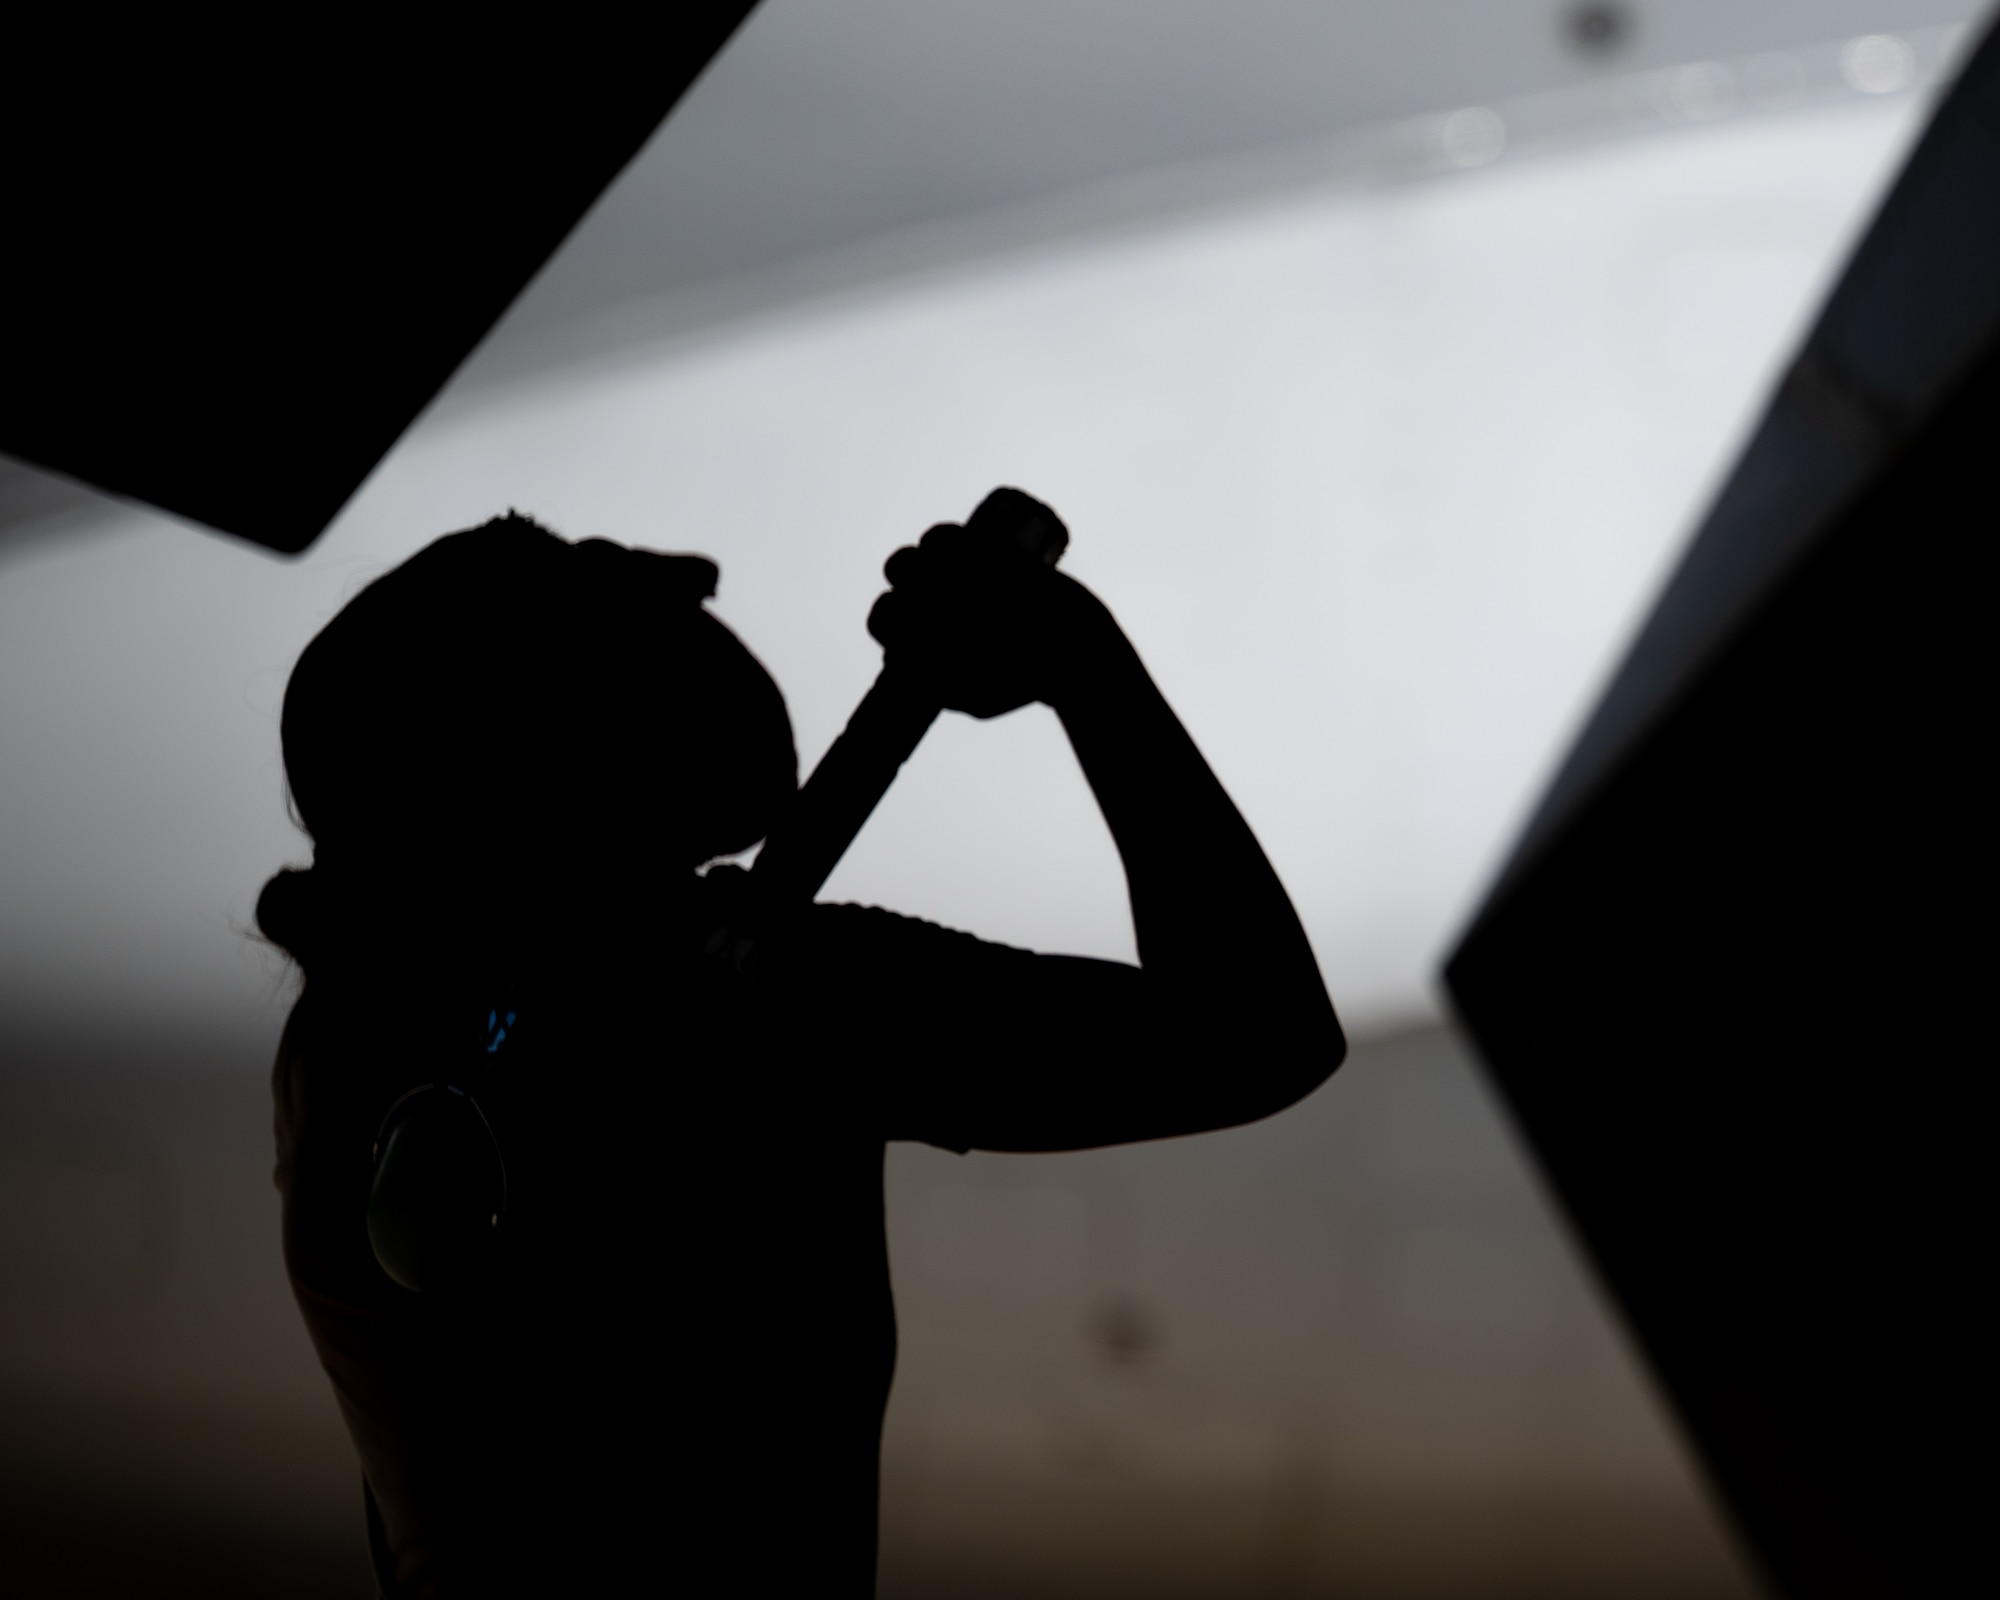 U.S. Air Force Staff Sgt. Colleen Clay, 961st Aircraft Maintenance Unit crew chief, inspects the wing of an E-3 Sentry at Kadena Air Base, Japan, Aug. 30, 2021. E-3 Sentries have a 360 degree radar view of the horizon and are responsible for airborne weather surveillance. (U.S. Air Force photo by Airman 1st Class Stephen Pulter)